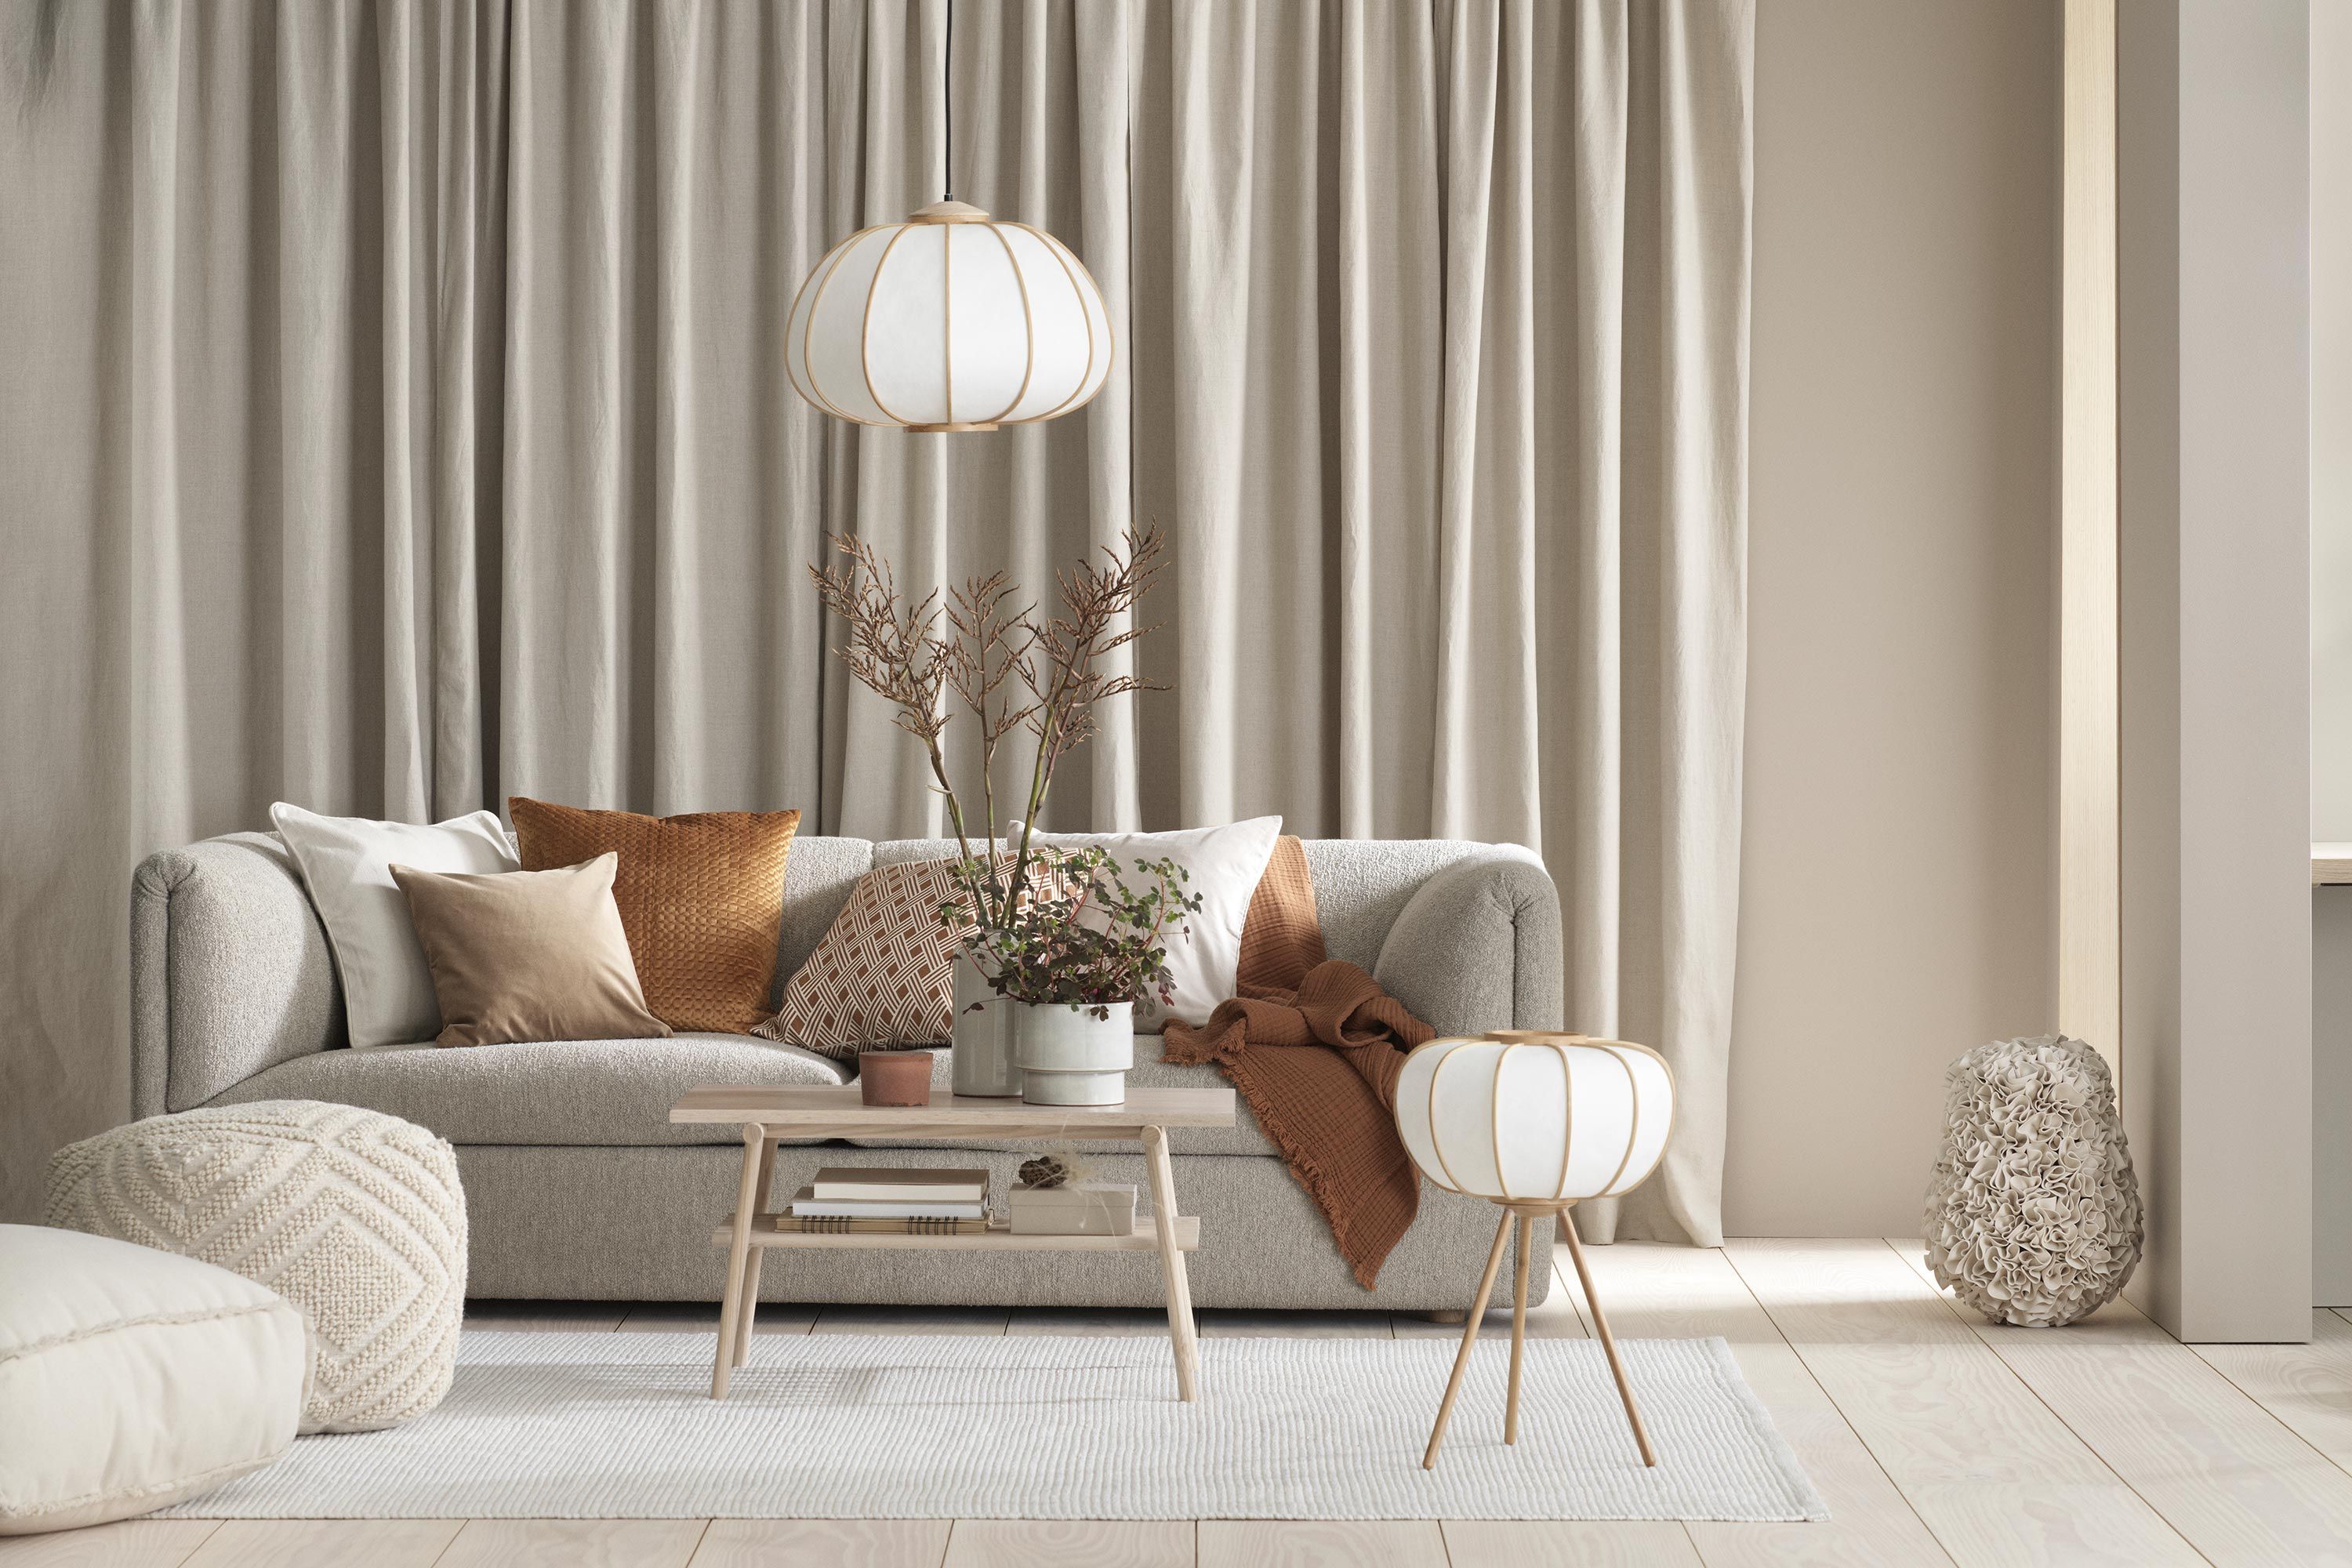 H M Has Launched Furniture And Lighting As Part Of Its Homeware Collection